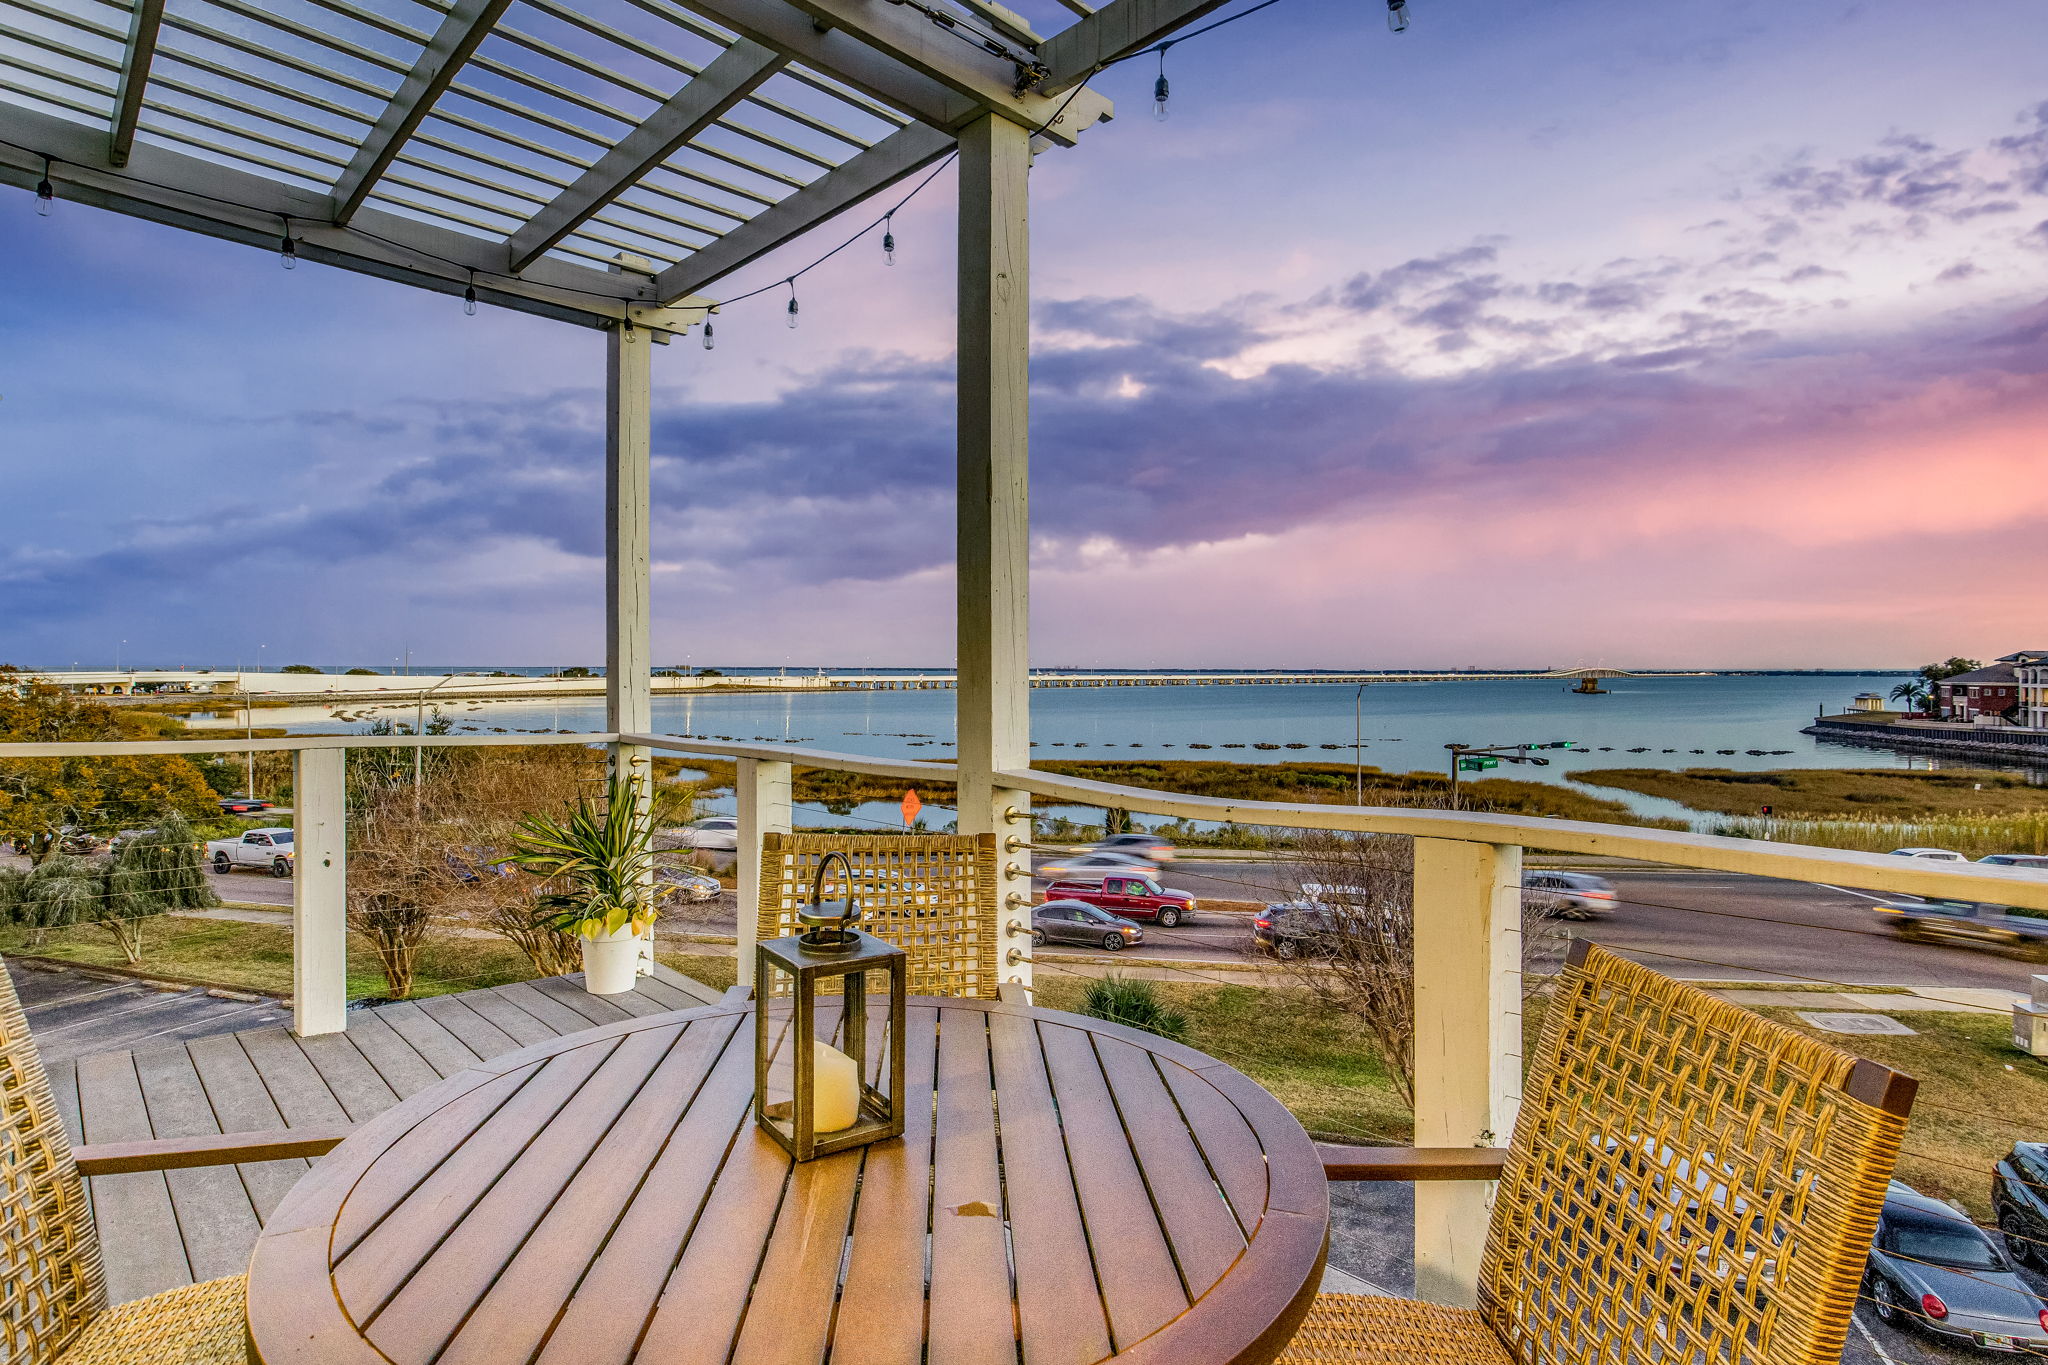 A view of Pensacola Bay from the vacation rental, Rainbow Row located in Downtown Pensacola. There is a table with two chairs on the balcony of the unit.